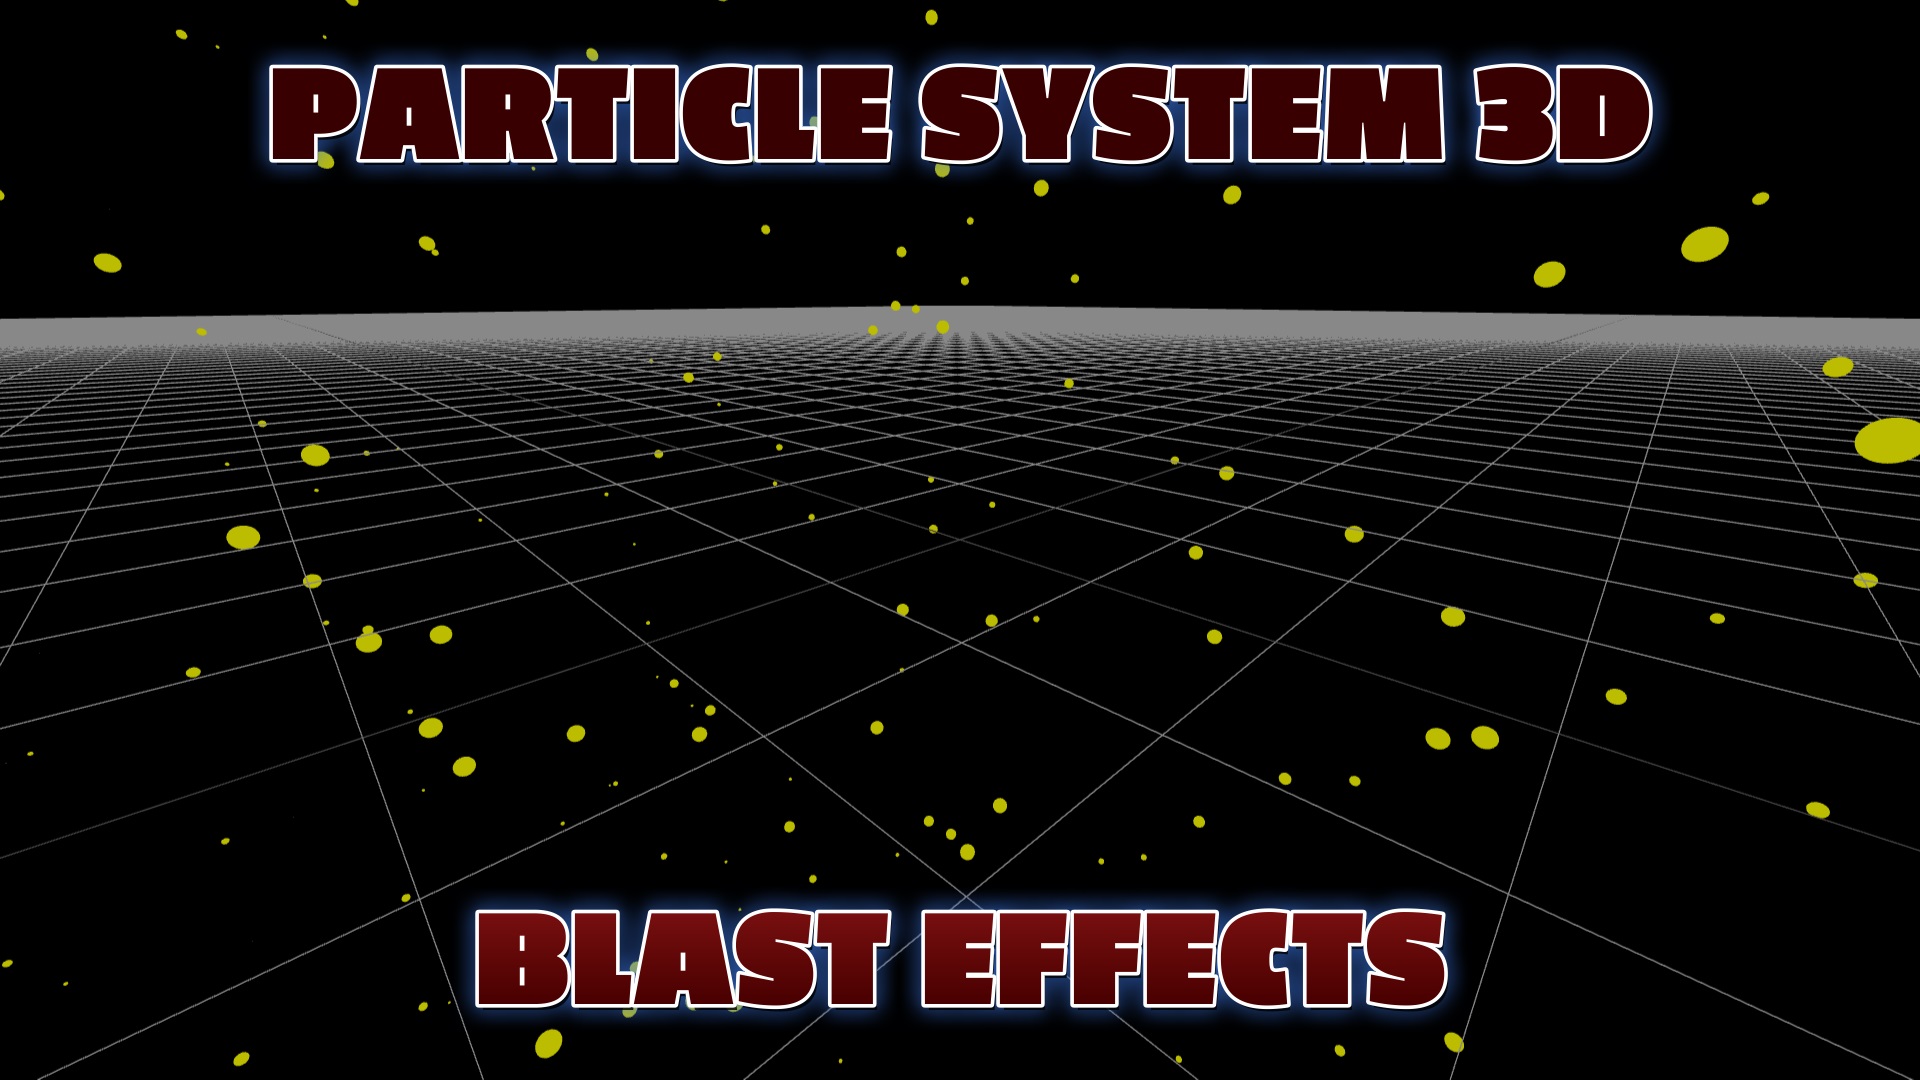 Three.js Examples - Parricle System Blast Effects